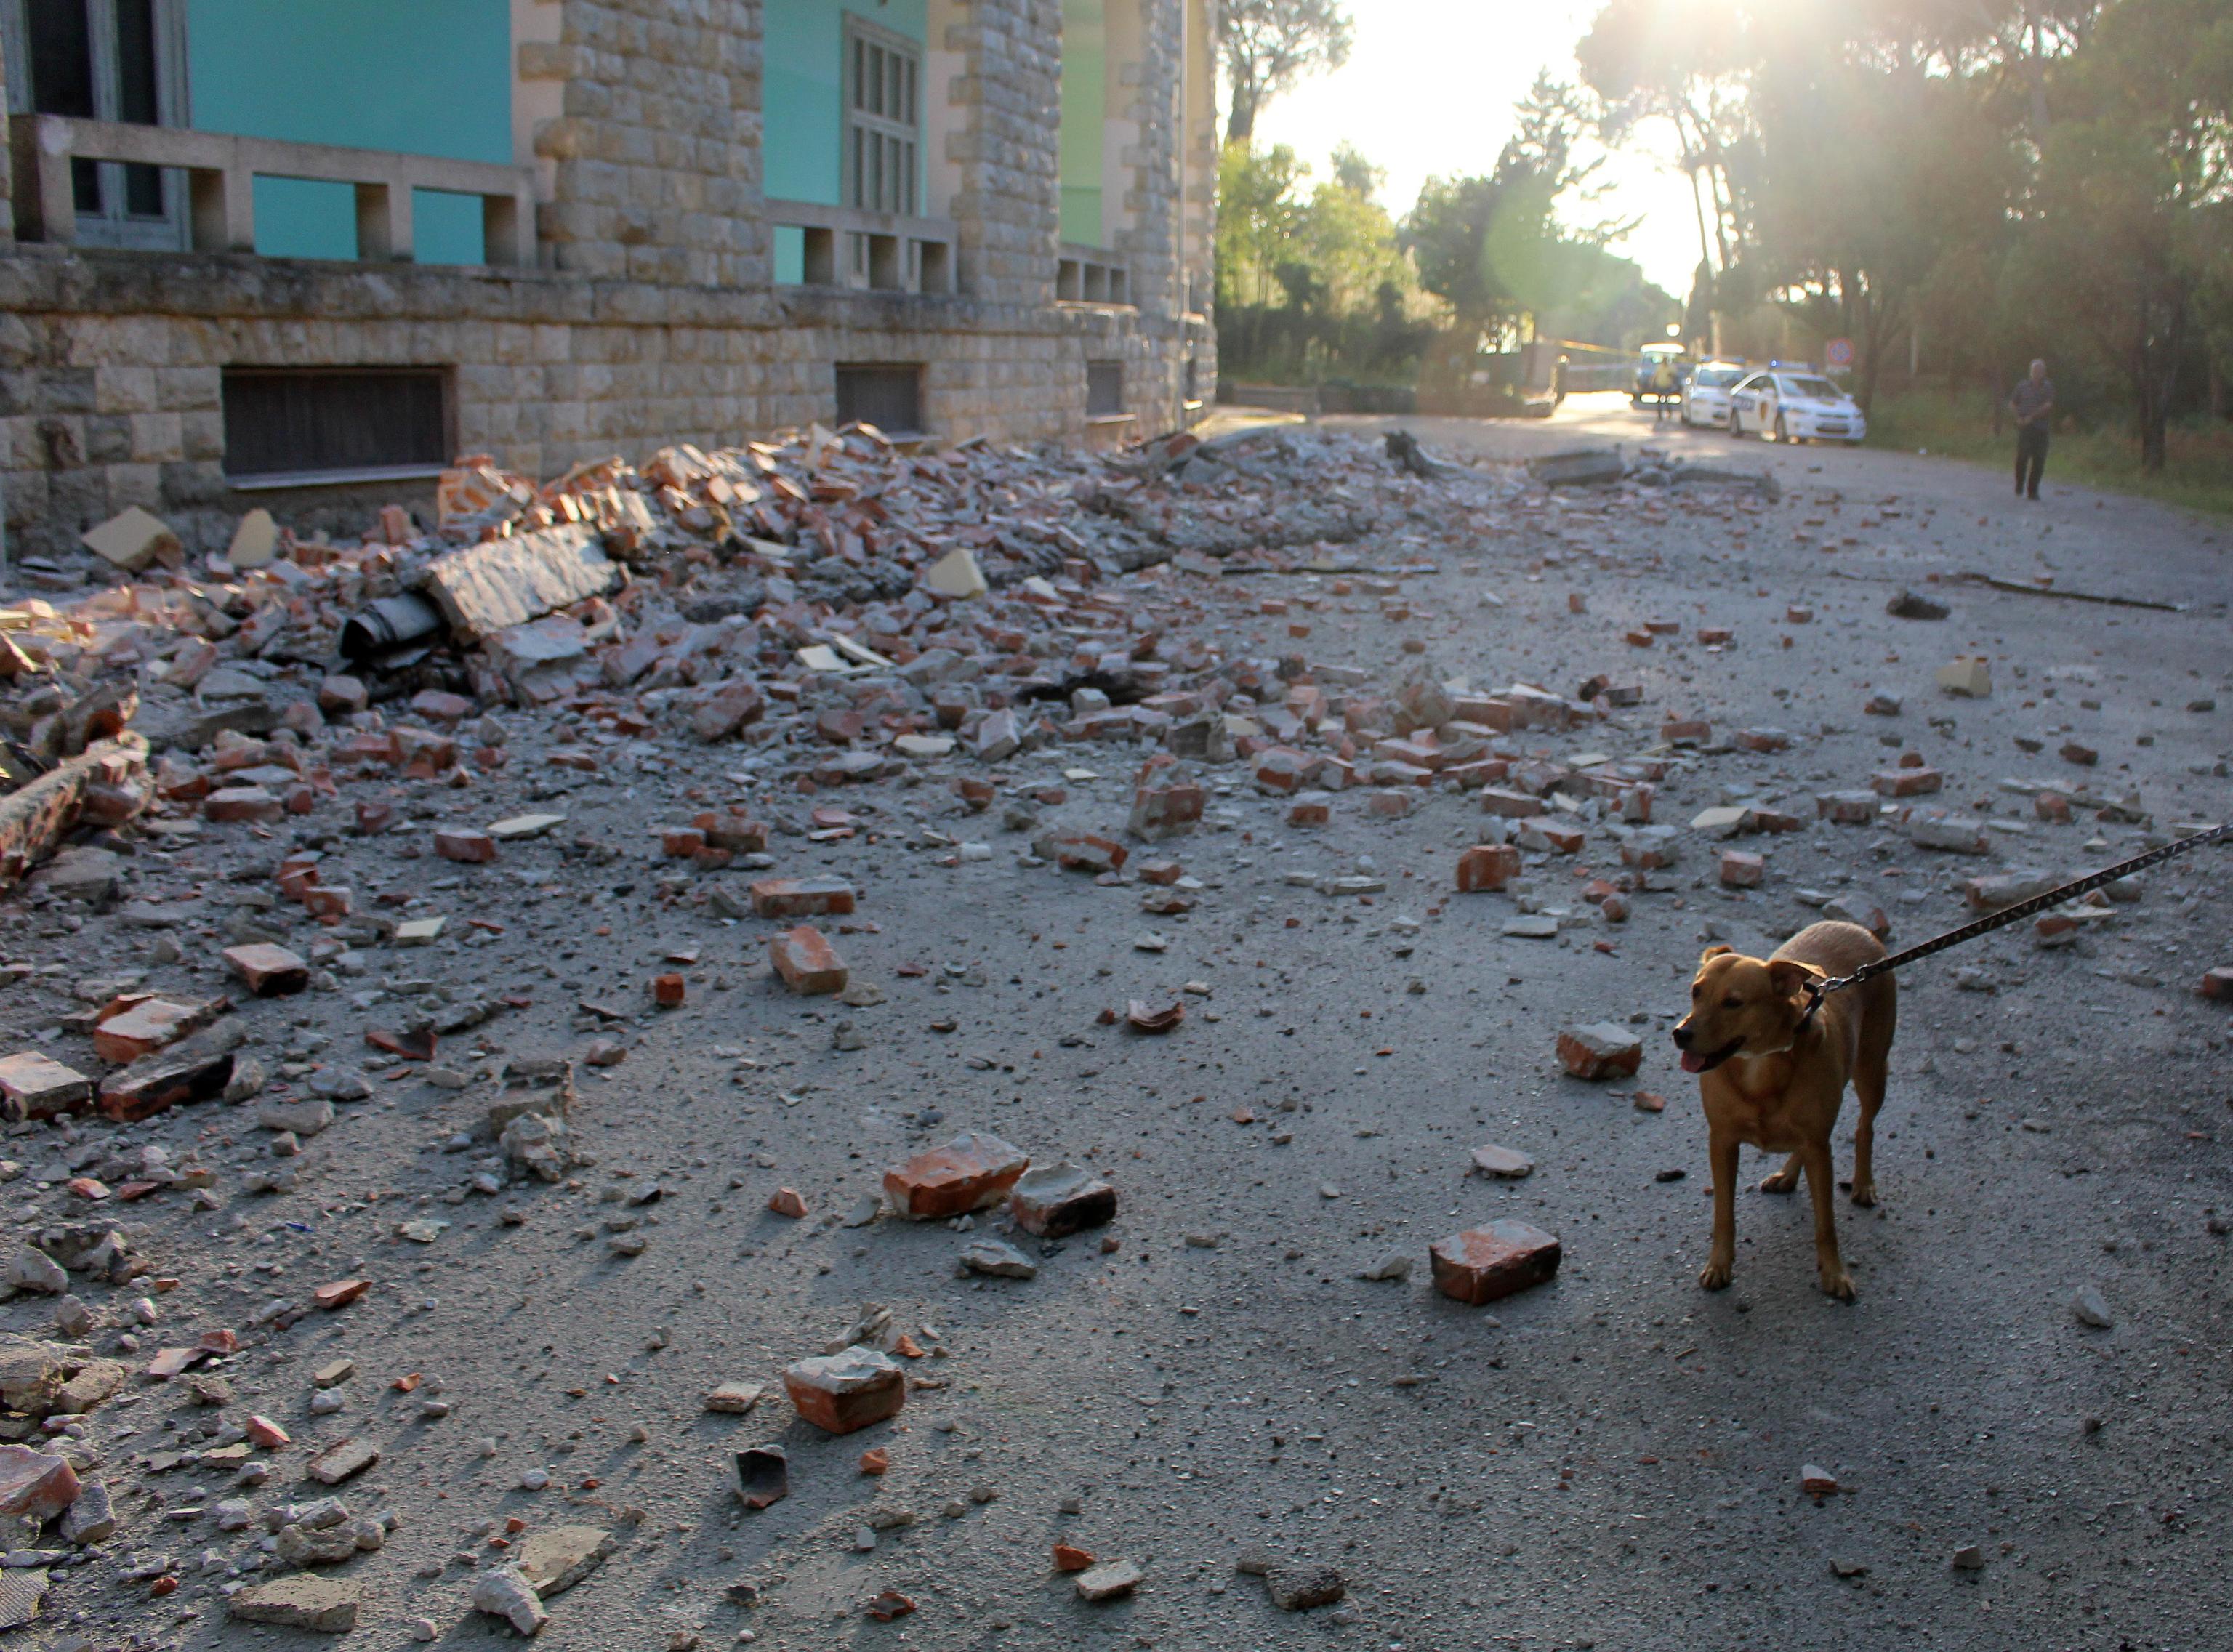 epa07859923 Bricks debris litter the groung of a building of the University of Geology and Mine damaged after a 5.8 magnitude earthquake hit in Tirana, Albania, 21 September 2019. According to reports, Albania was rocked by its strongest earthquake in 30 years, with the epicentre in the coastal town of Durres, at least 49 people have been reported injured from the earthquake.  EPA/MALTON DIBRA